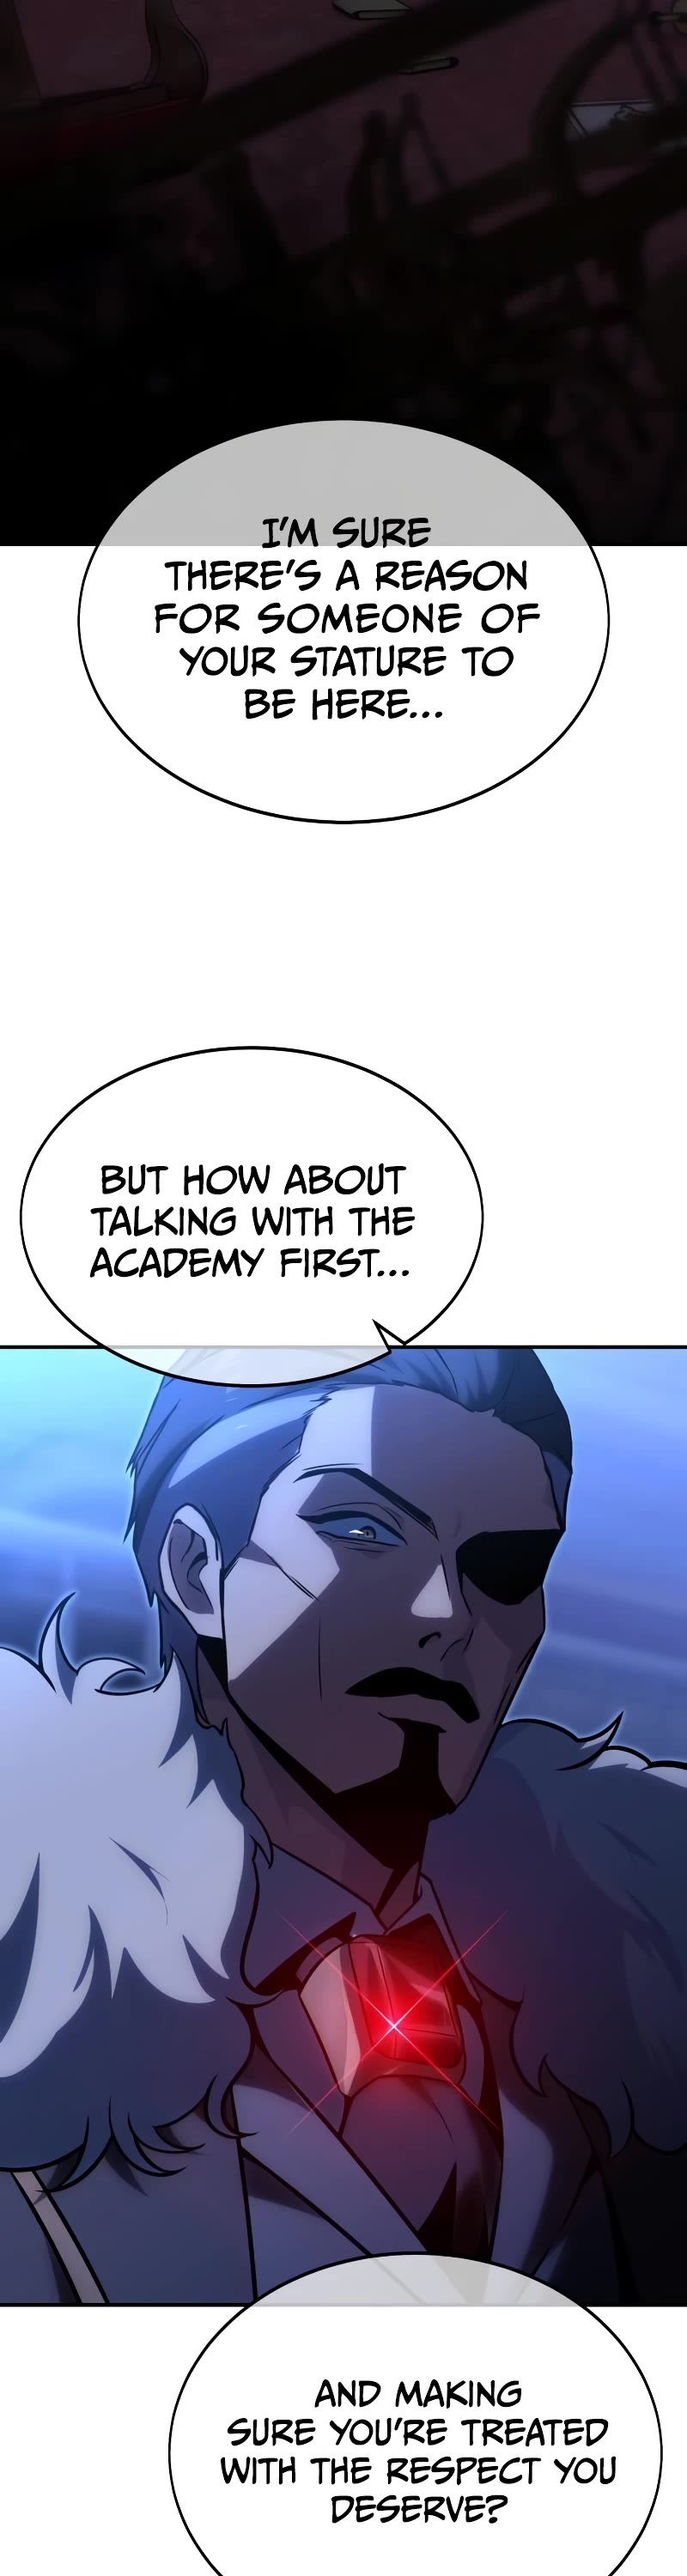 The Extra’S Academy Survival Guide Chapter 18